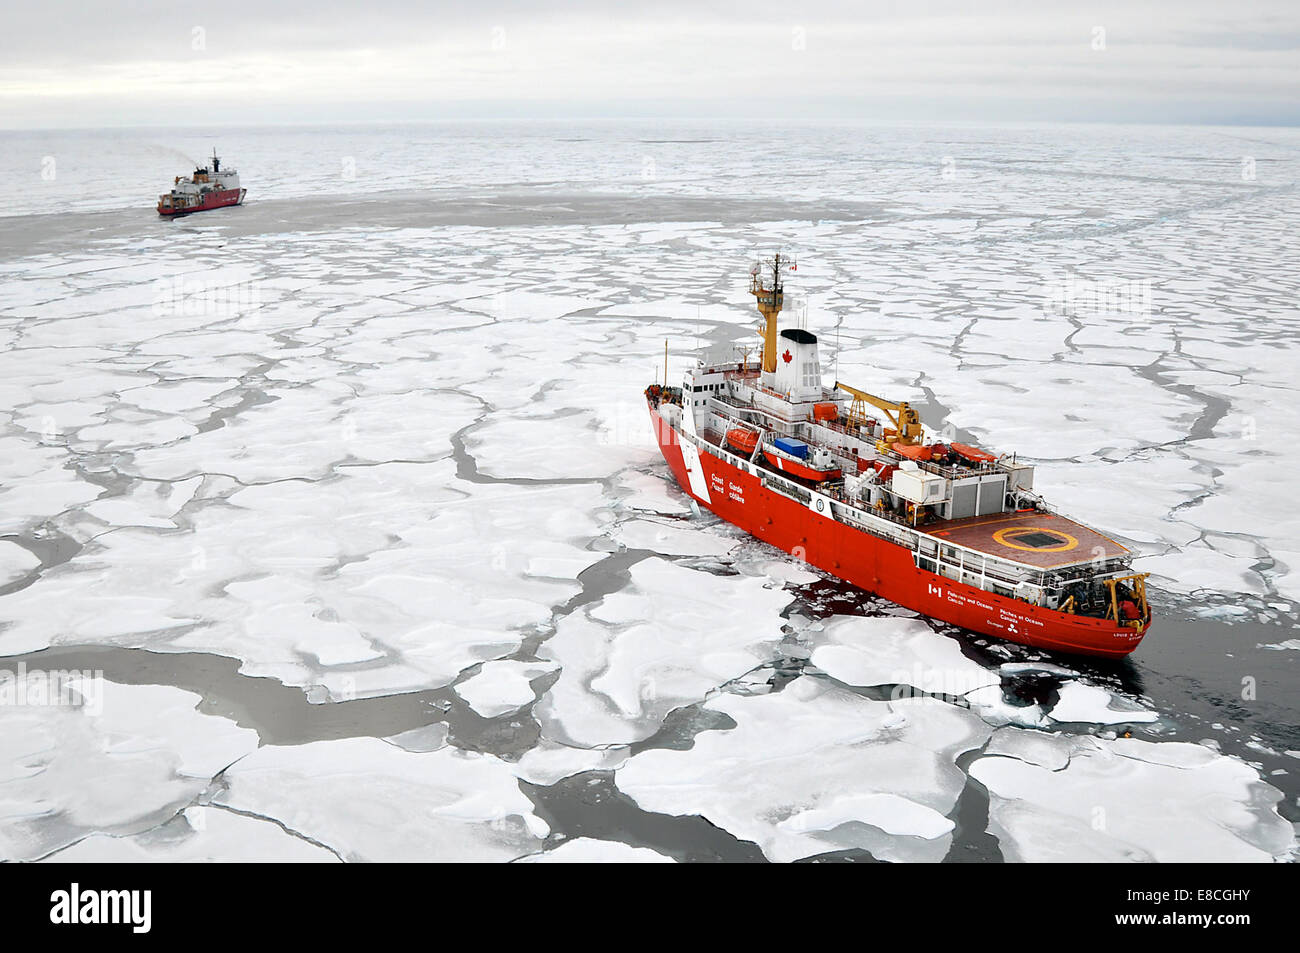 Closing In ARCTIC OCEAN – The Canadian Coast Guard Ship Louis S. St-Laurent makes an approach to the Coast Guard Cutter Healy in the Arctic Ocean Sept. 5, 2009. The two ships are taking part in a multi-year, multi-agency Arctic survey that will help defin Stock Photo